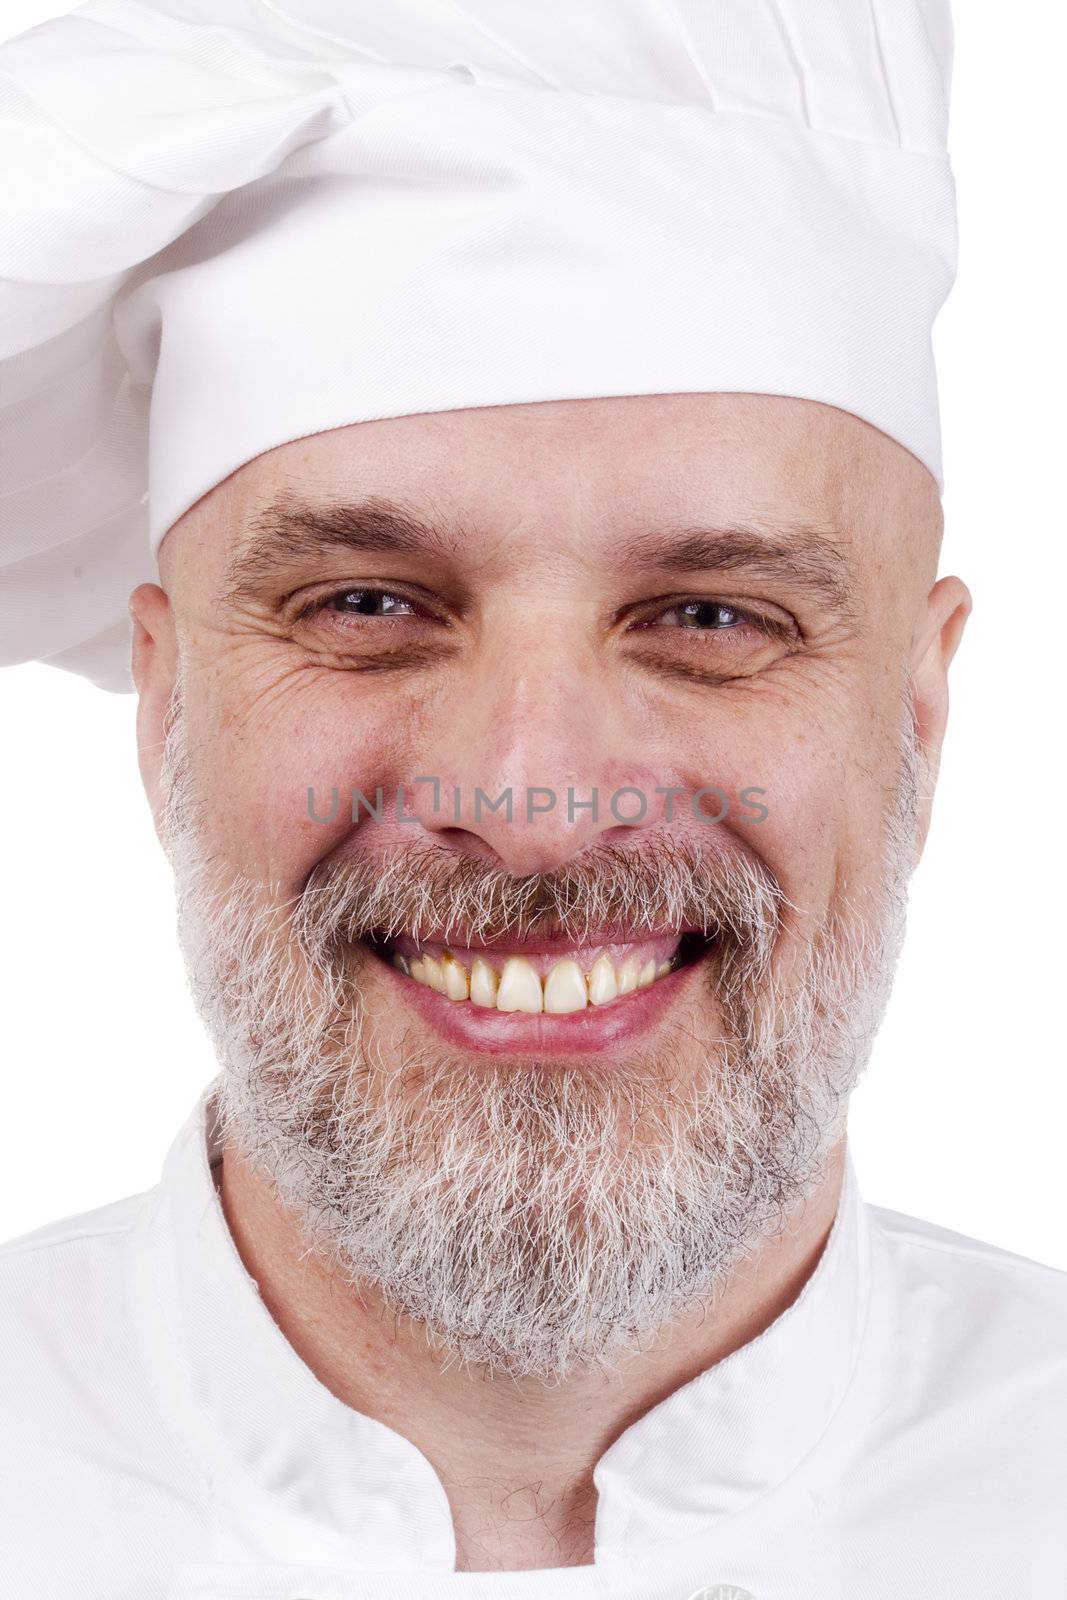 Portrait of a happy chef in a chef's hat.